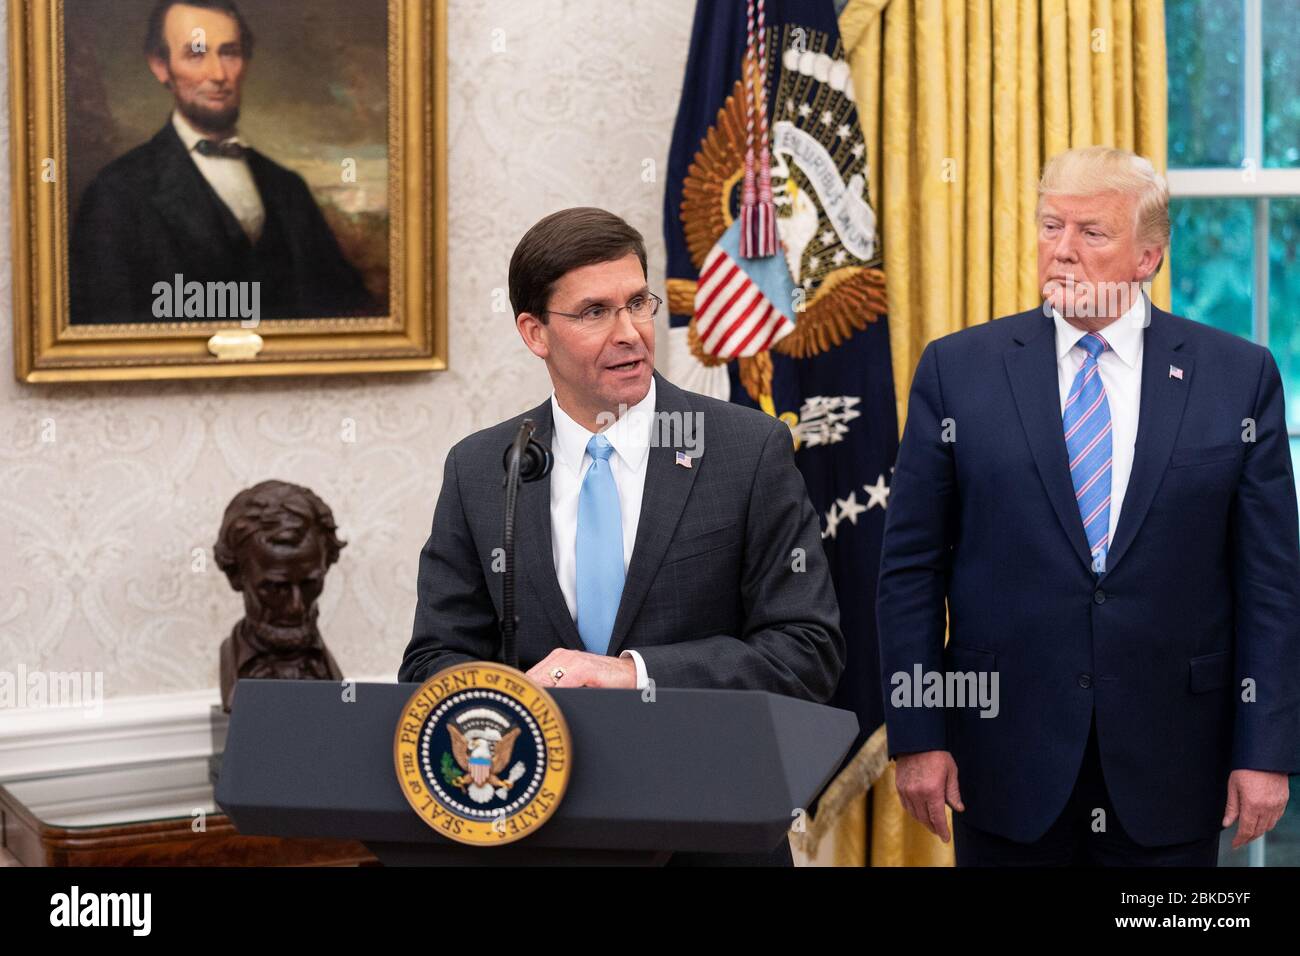 President Donald J. Trump watches as new Secretary of Defense Mark Esper delivers remarks Tuesday, July 23, 2019, in the Oval Office of the White House. Swearing-in Ceremony for Secretary of Defense Mark Esper Stock Photo